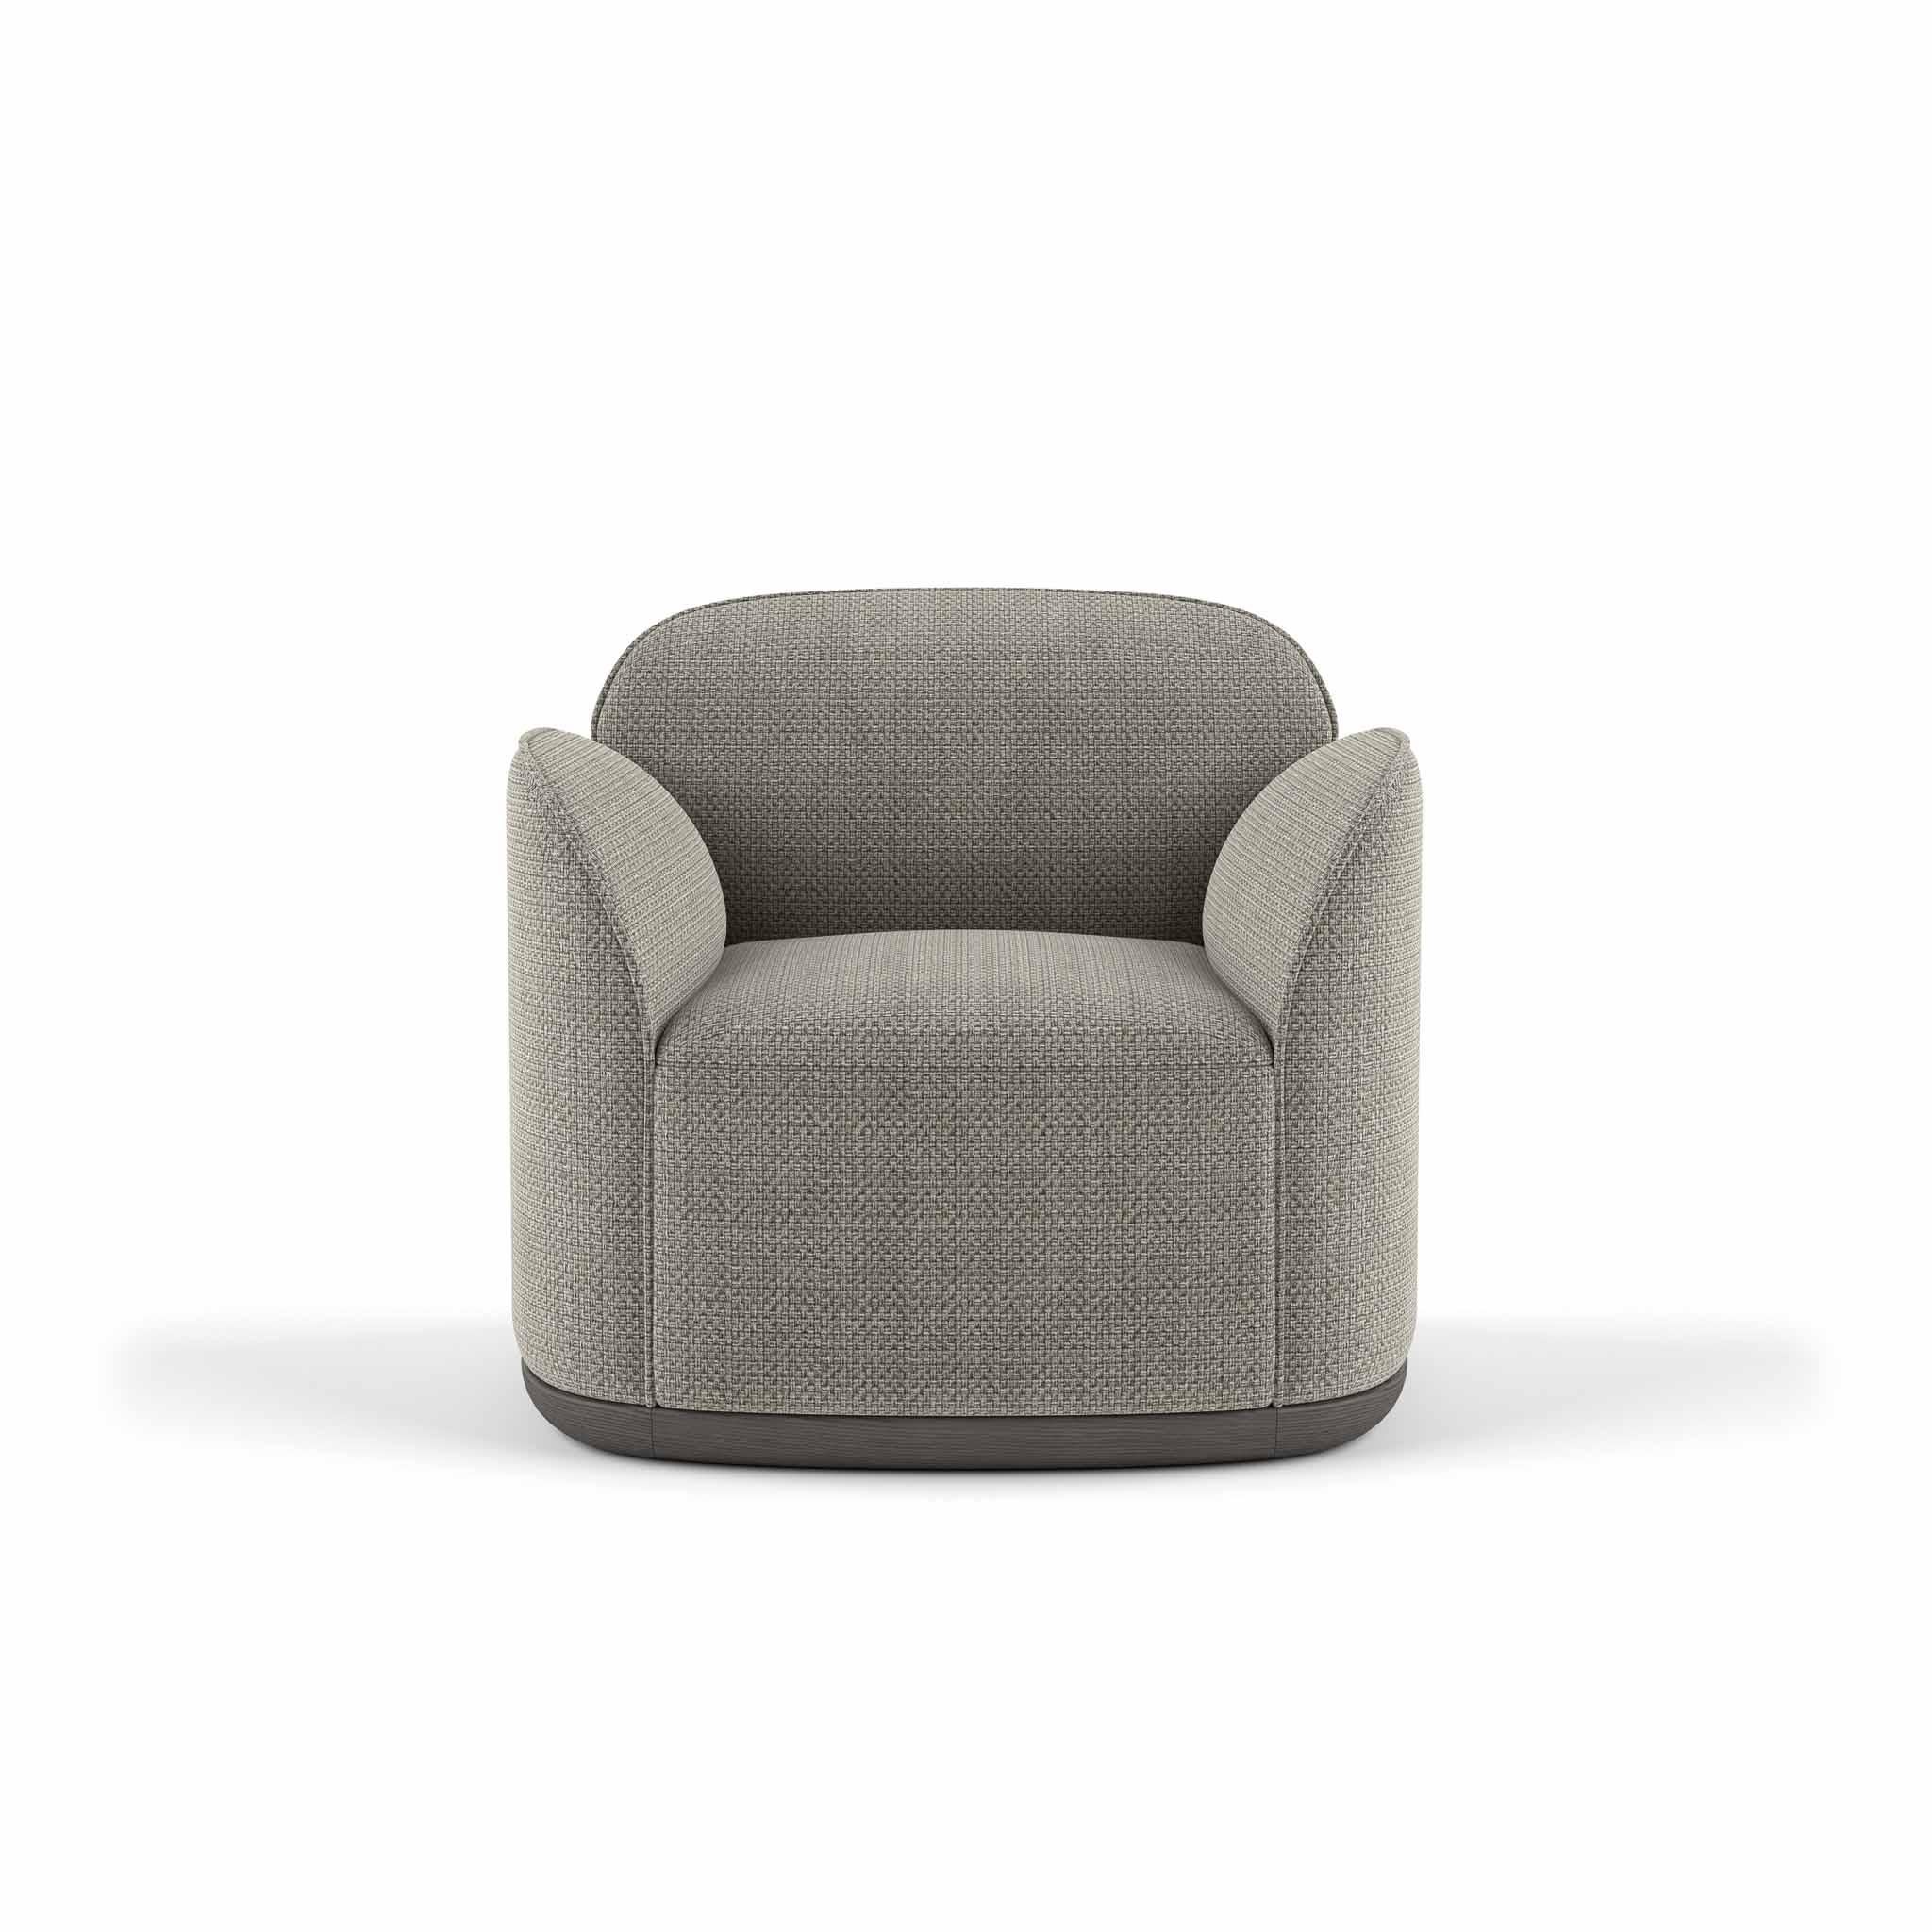 Contemporary Armchair 'Unio' by Poiat, Fabric Hanoi 04 by Pierre Frey For Sale 3